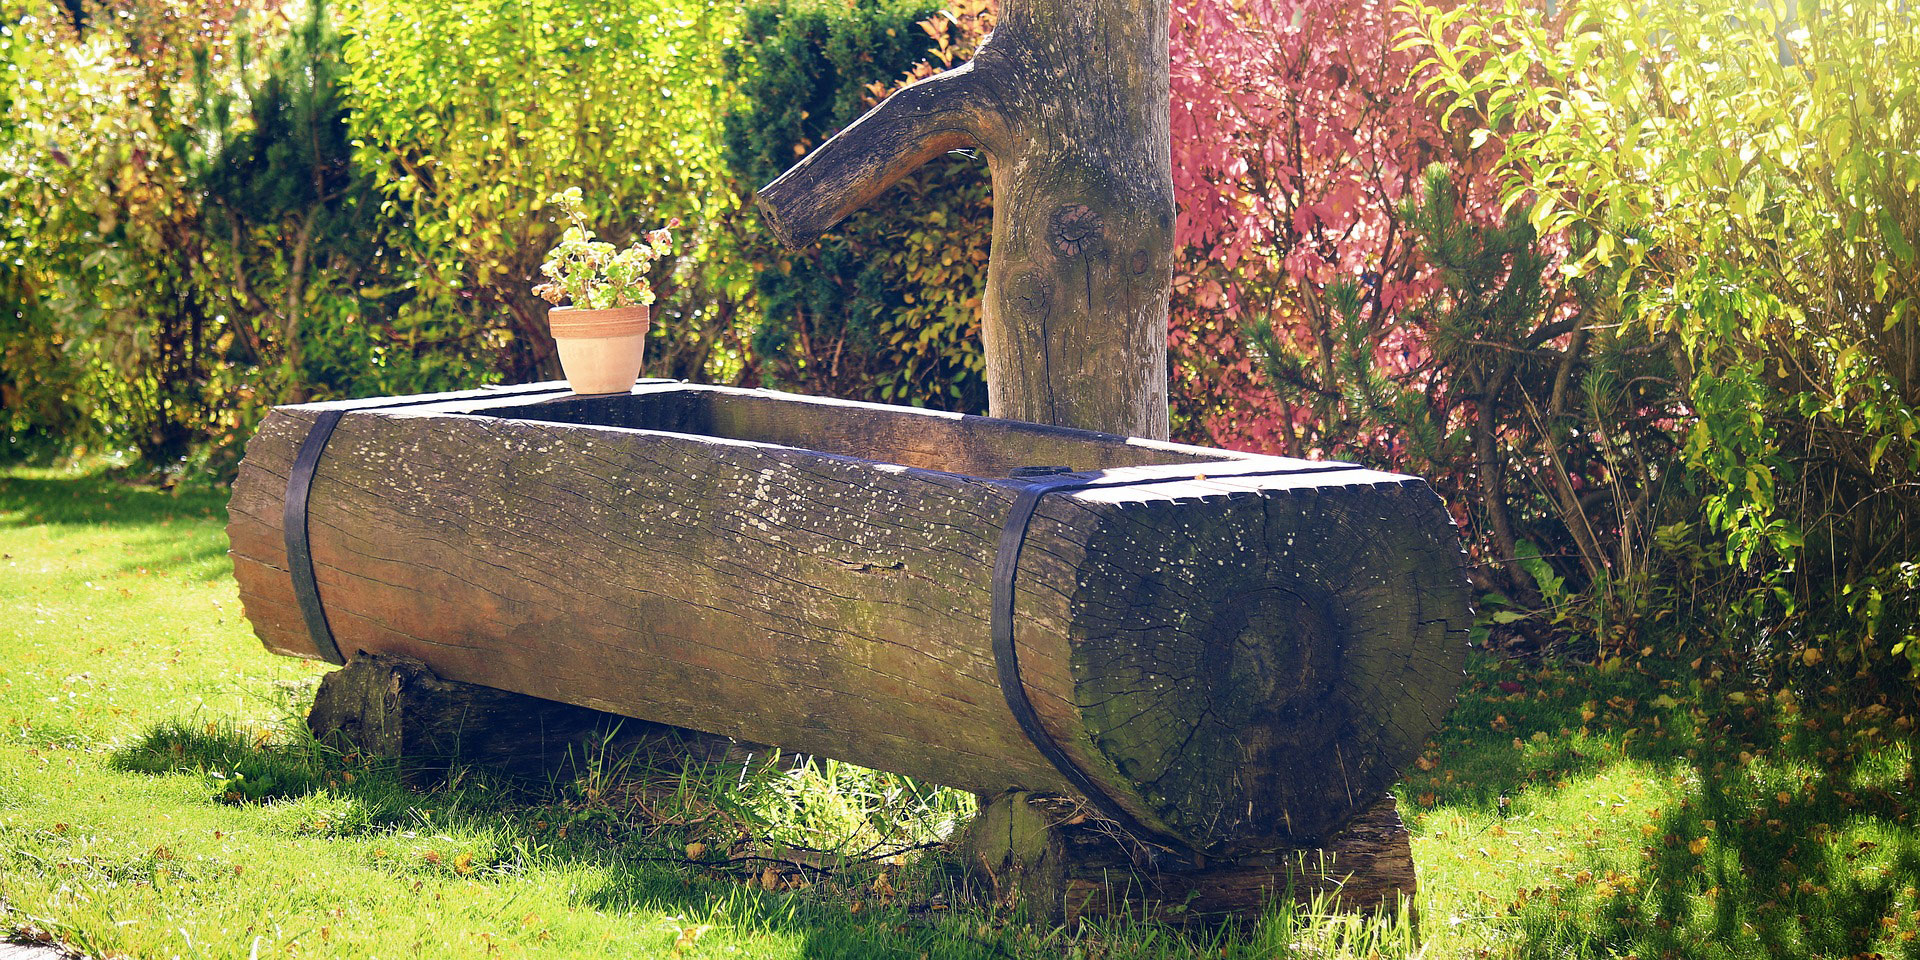 Water features are a fantastic way to enhance your landscaping and bring excitement or tranquility to your environment